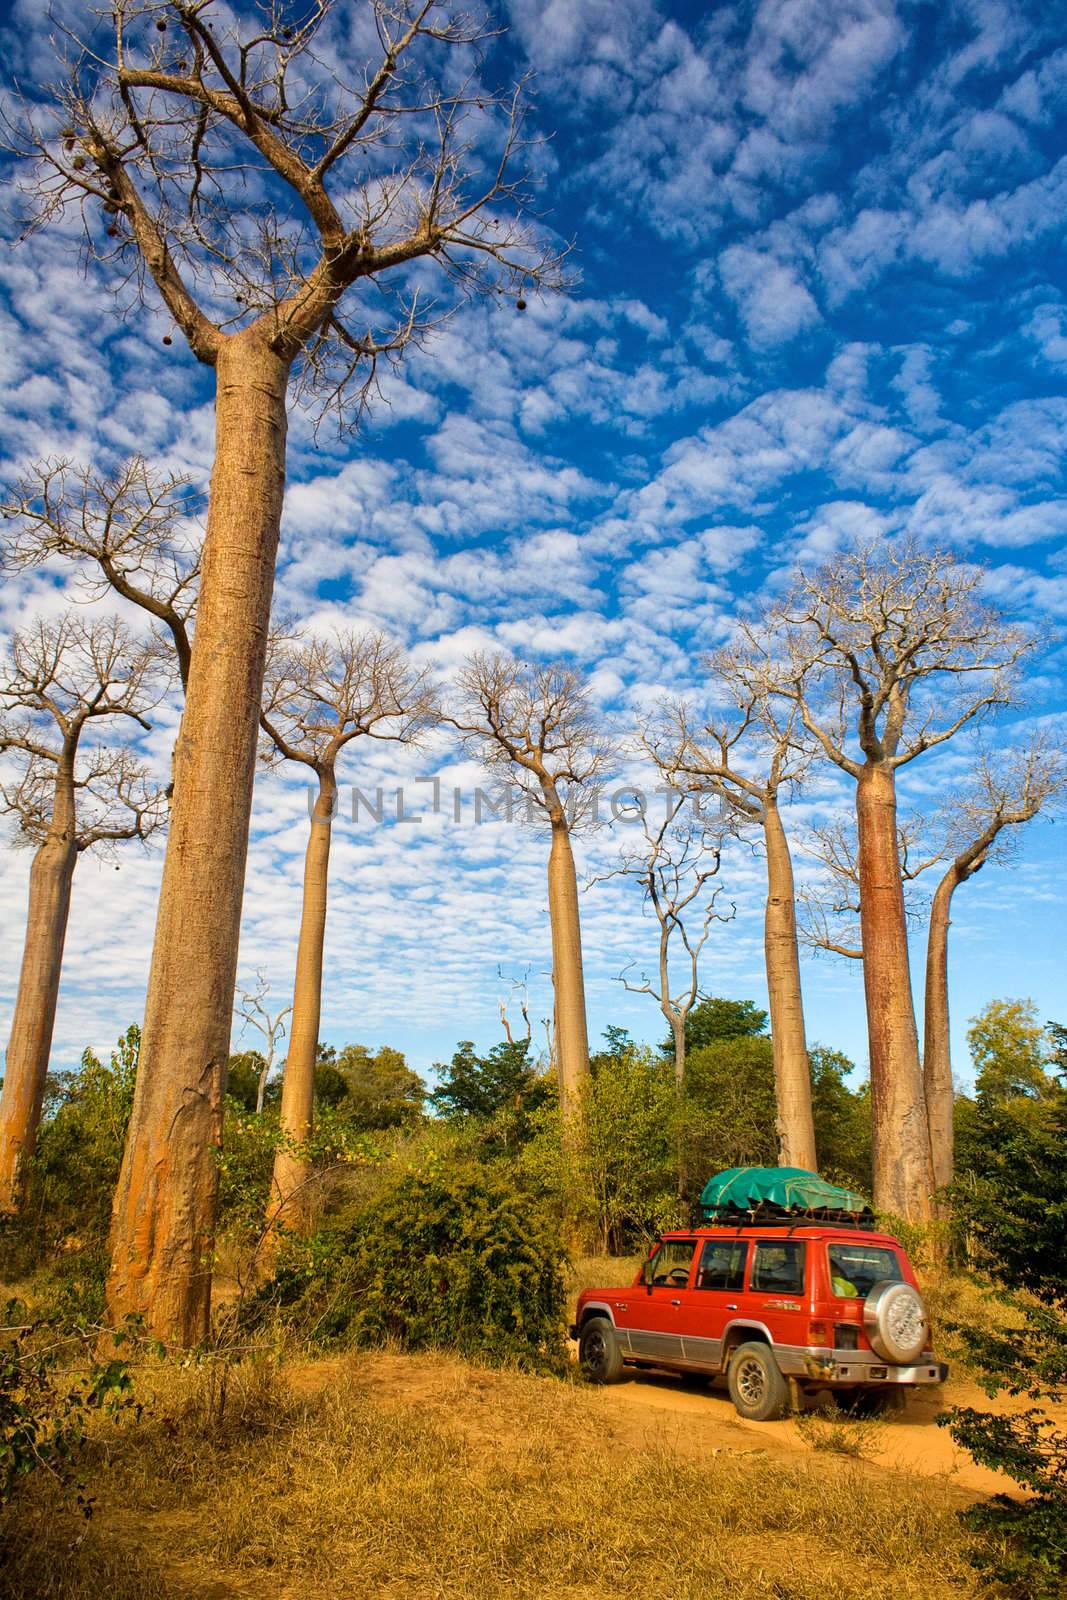 Baobabs trees from Madagascar in the savannah of Madagascar